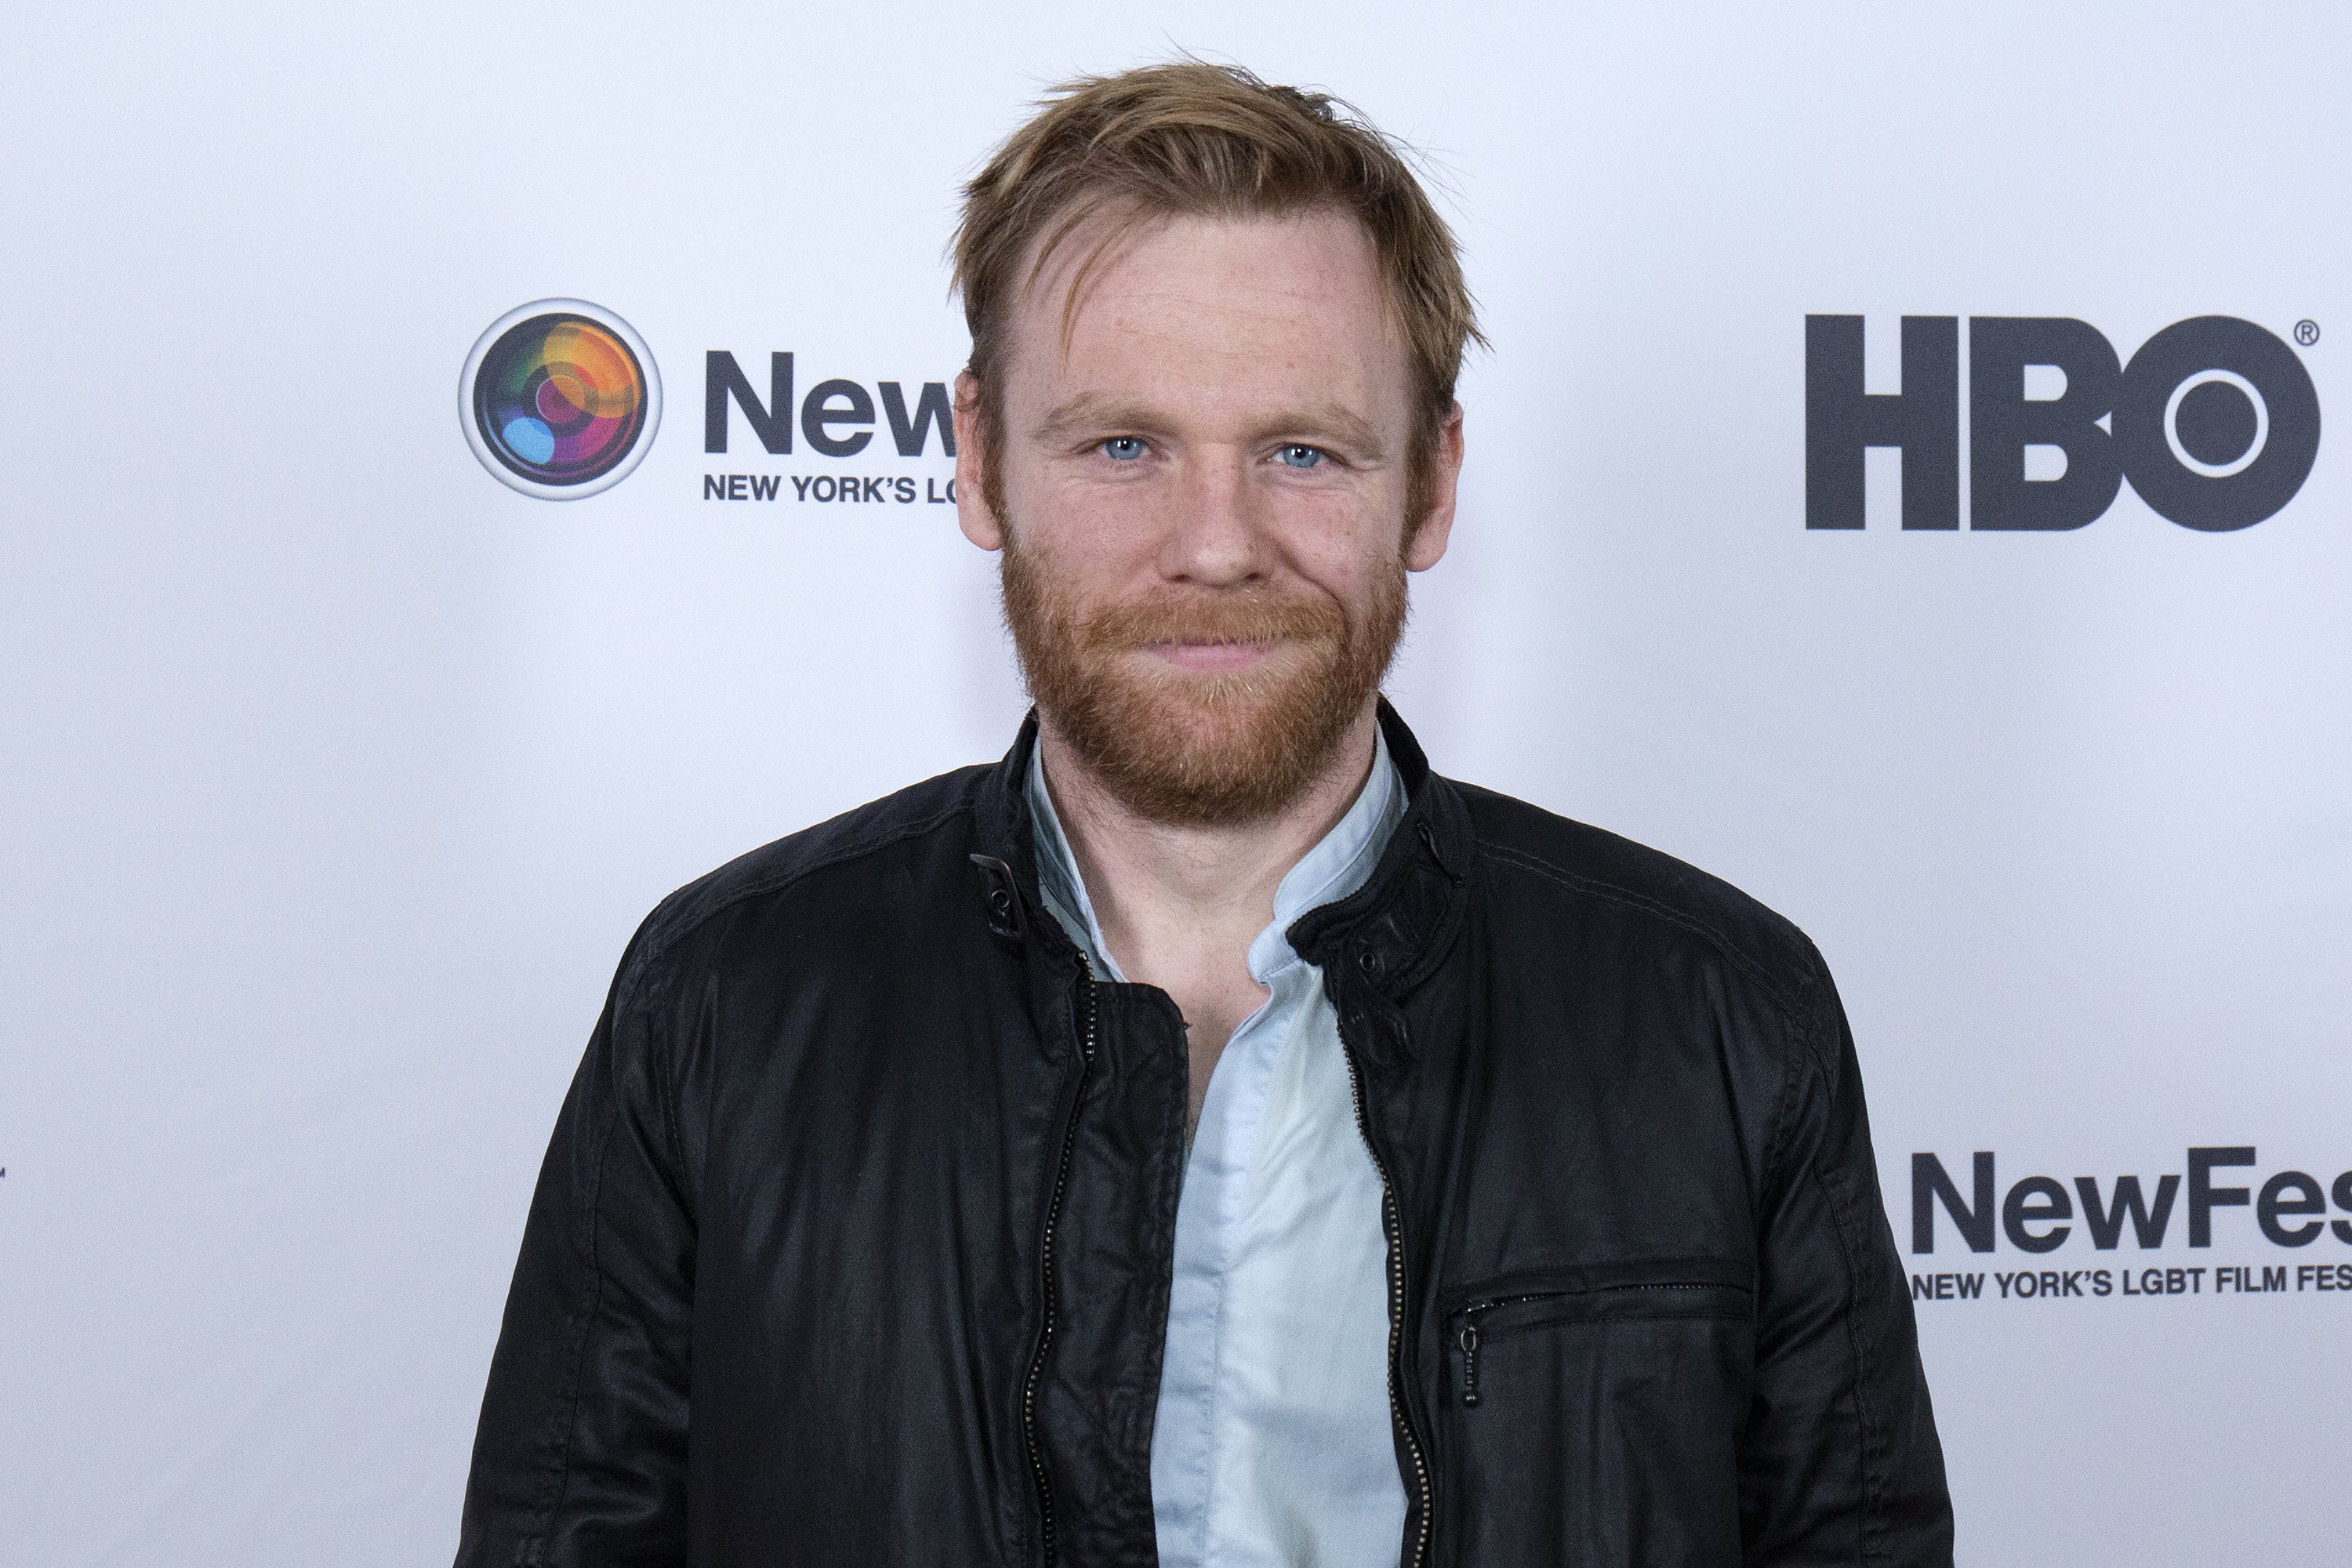 Brian Gleeson at the premiere of "The Bisexual" on October 29, 2018, in New York | Source: Getty Images